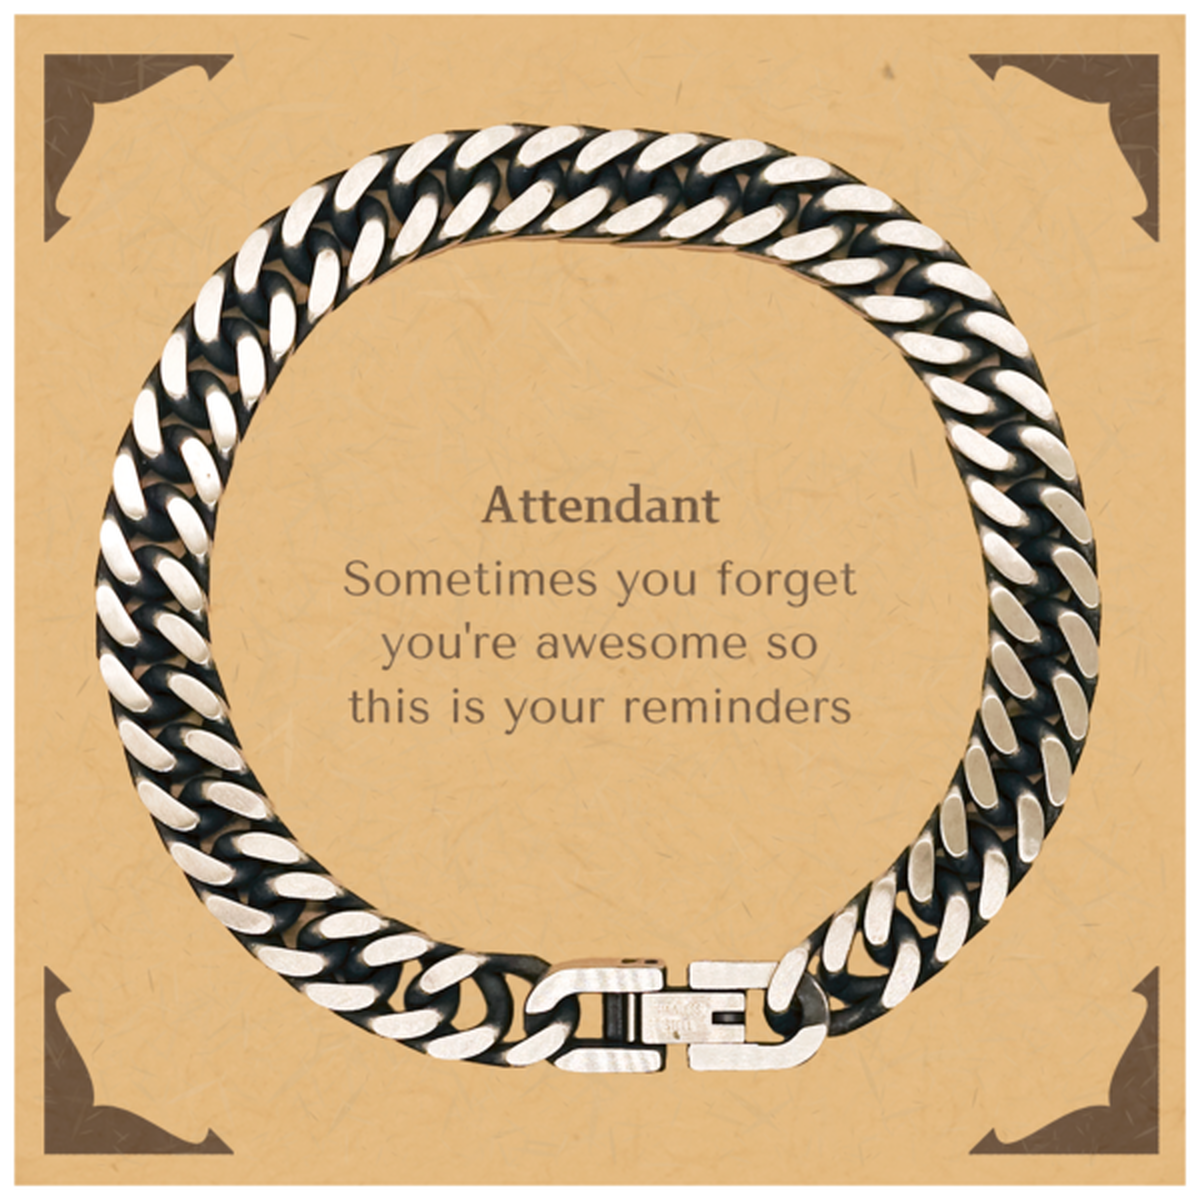 Sentimental Attendant Cuban Link Chain Bracelet, Attendant Sometimes you forget you're awesome so this is your reminders, Graduation Christmas Birthday Gifts for Attendant, Men, Women, Coworkers